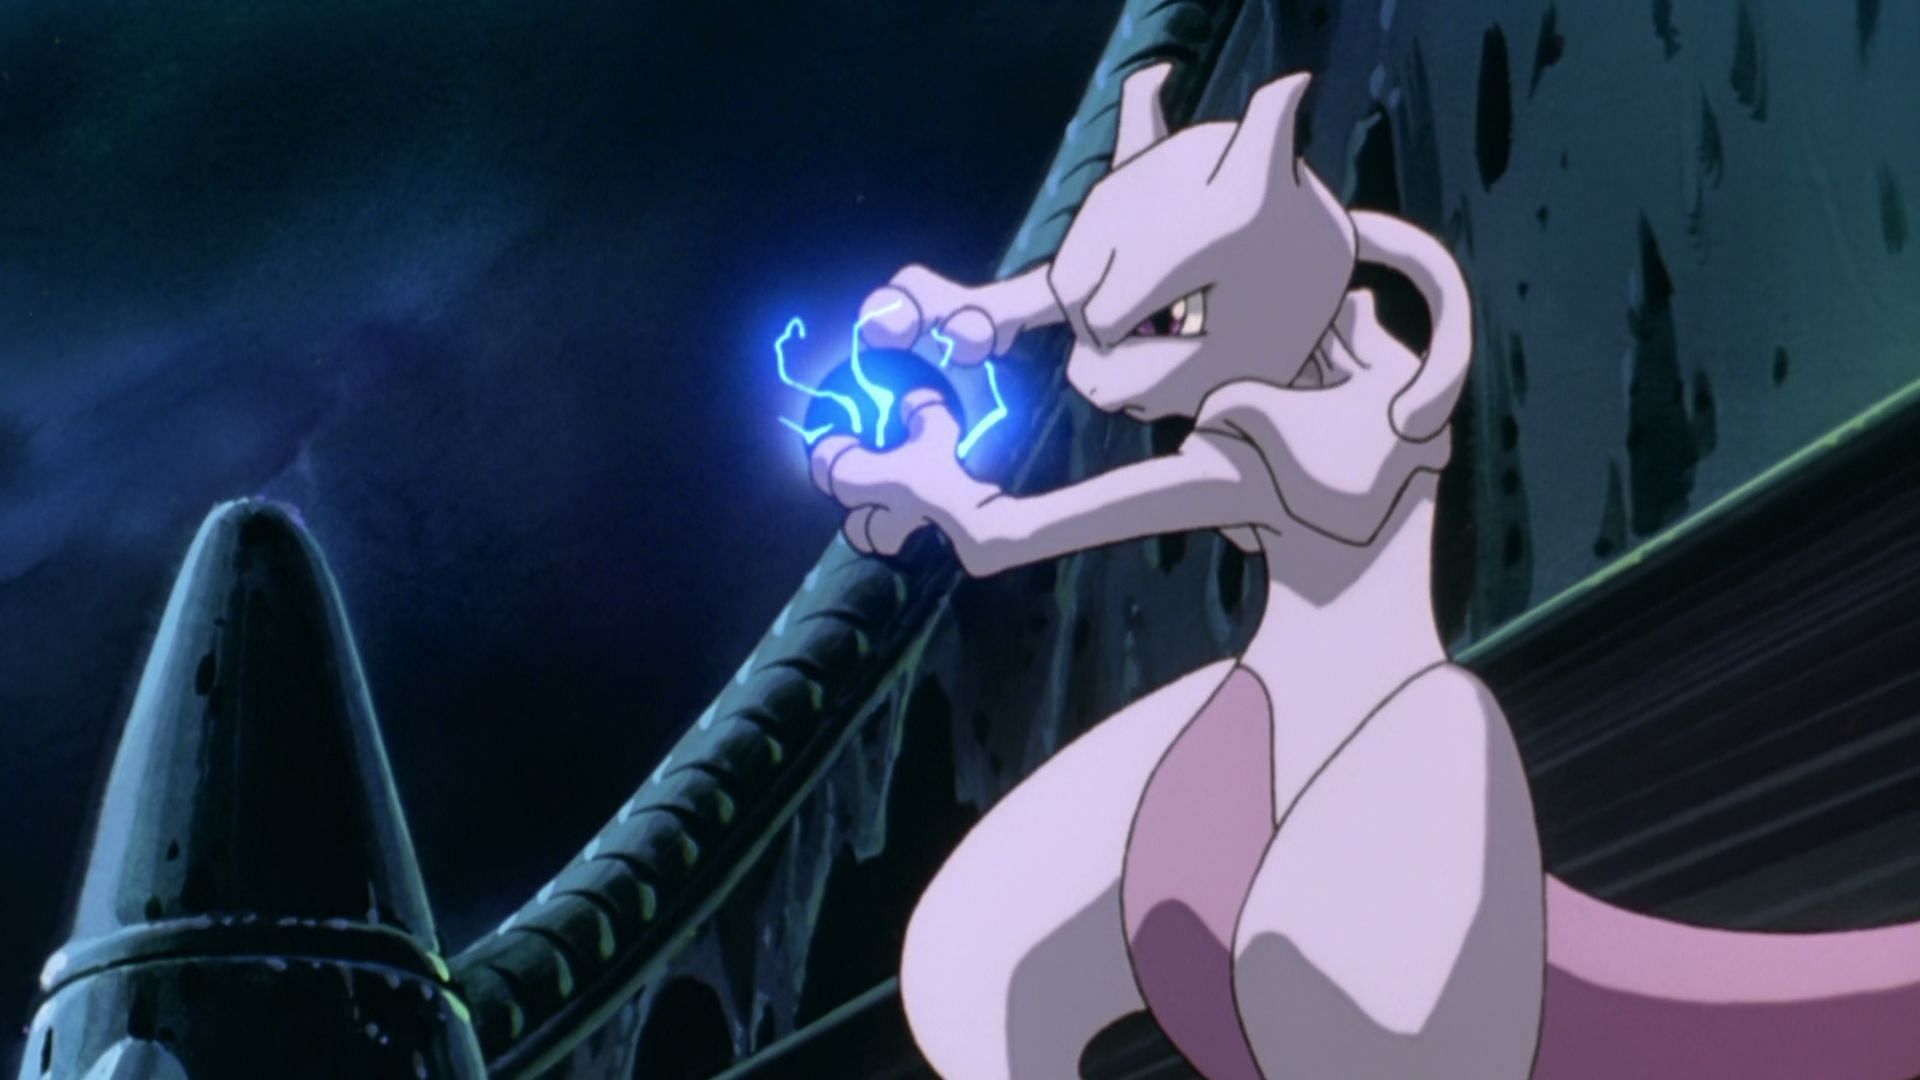 Mewtwo has been amazing in combat for more than 20 years (Image credit: OLM Incorporated, Pokemon: Mewtwo Strikes Back)